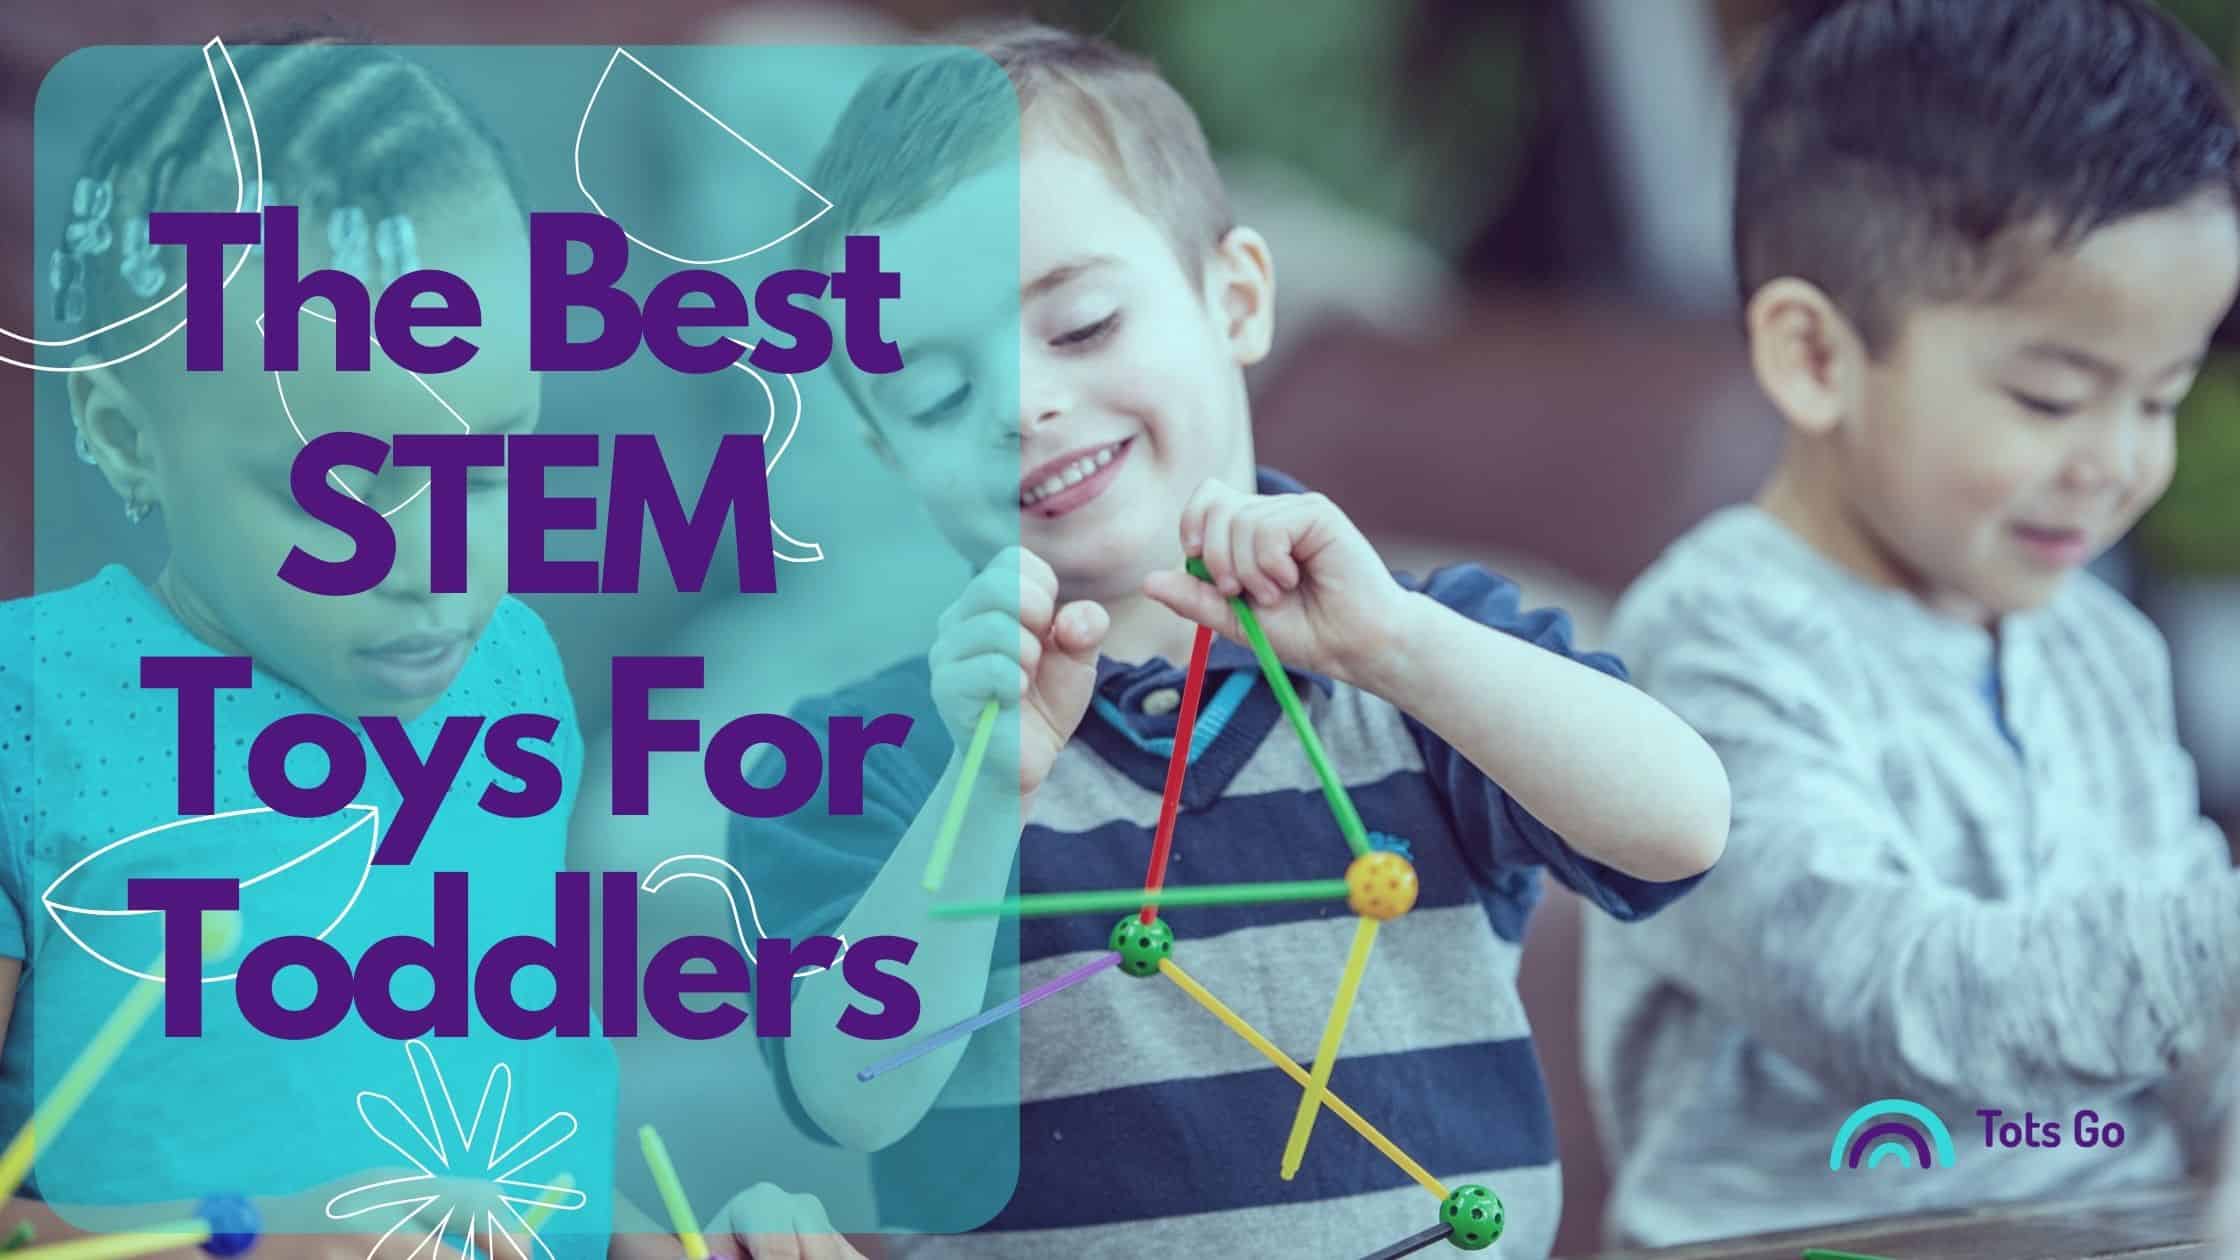 The Best STEM Toys For Toddlers